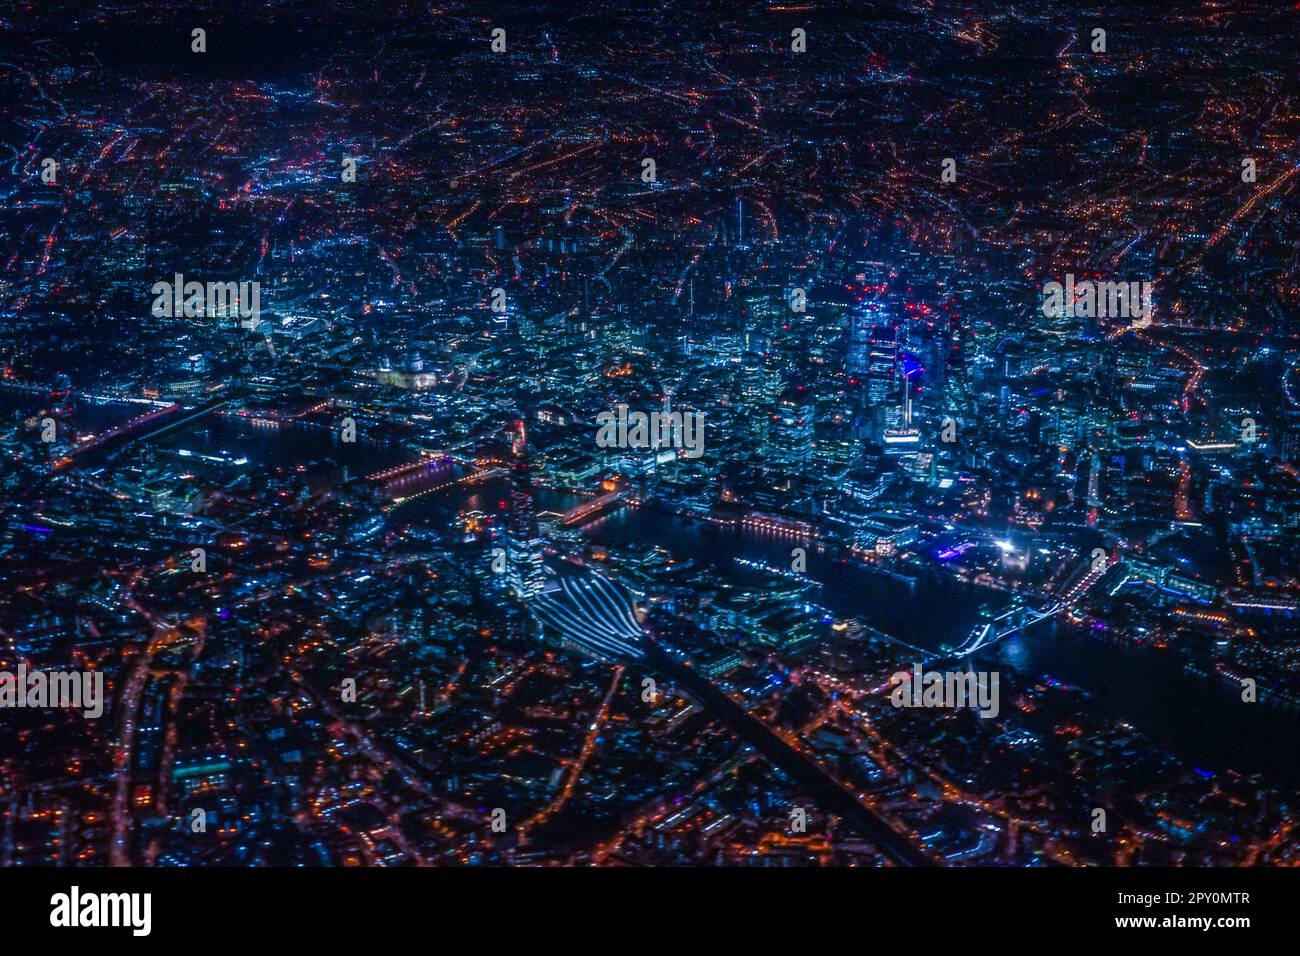 London night view as seen from an airplane. Shooting Location: United Kingdom, London Stock Photo